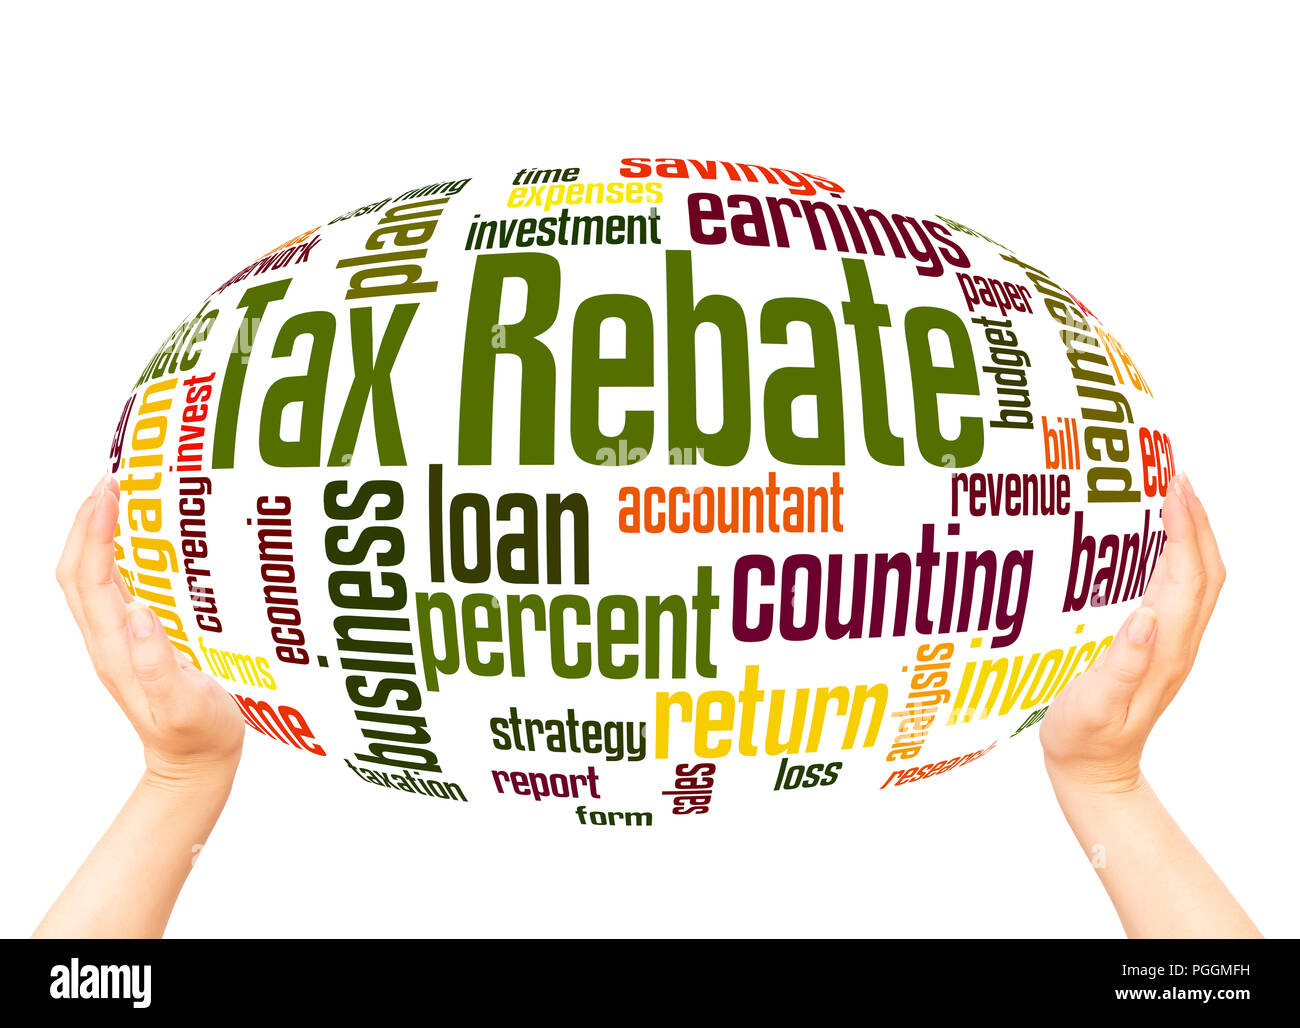 tax-rebate-word-cloud-hand-sphere-concept-on-white-background-stock